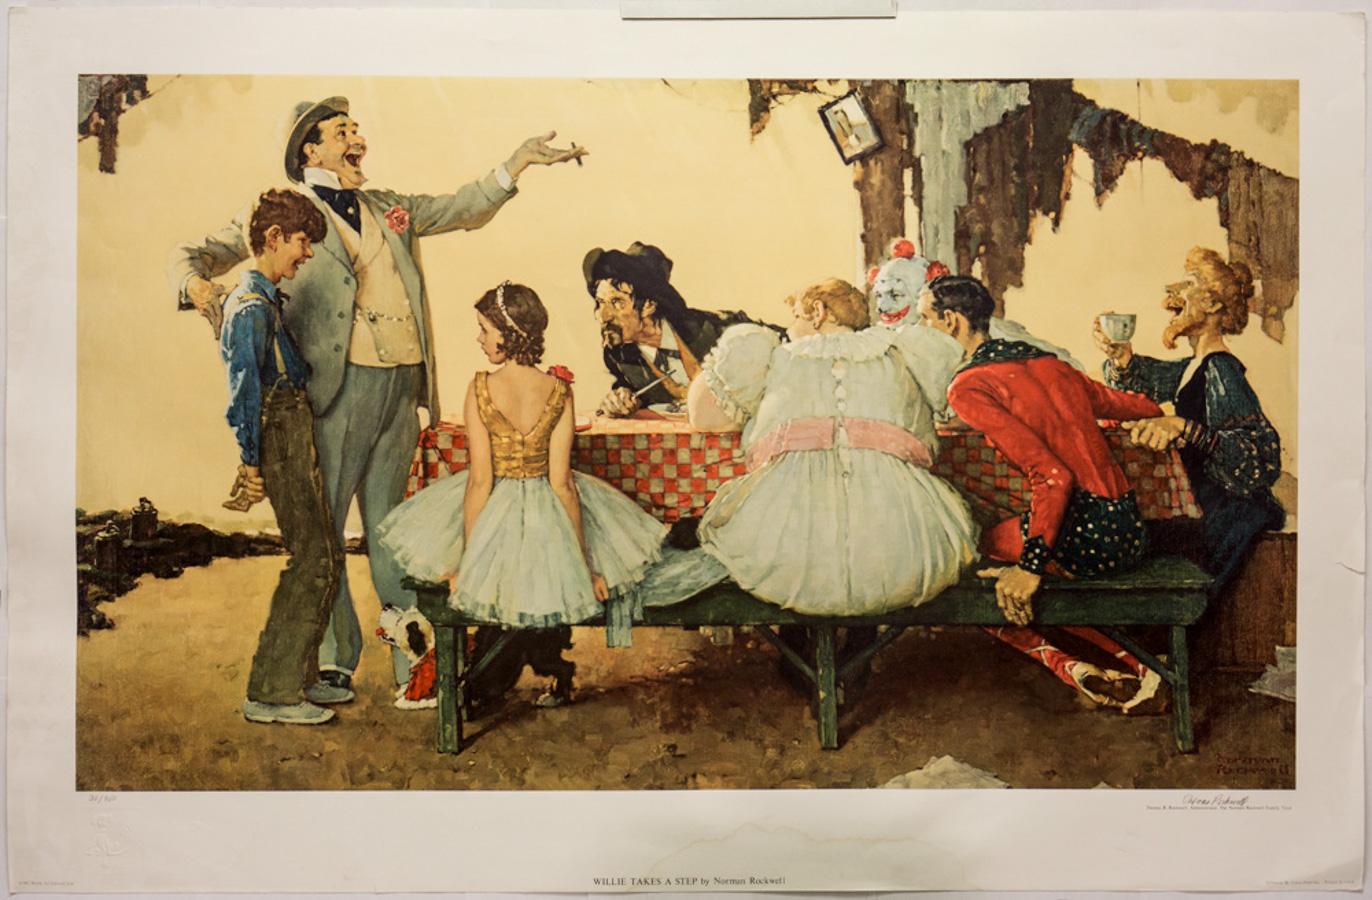 Figurative Print Norman Rockwell - Willie Takes a Step